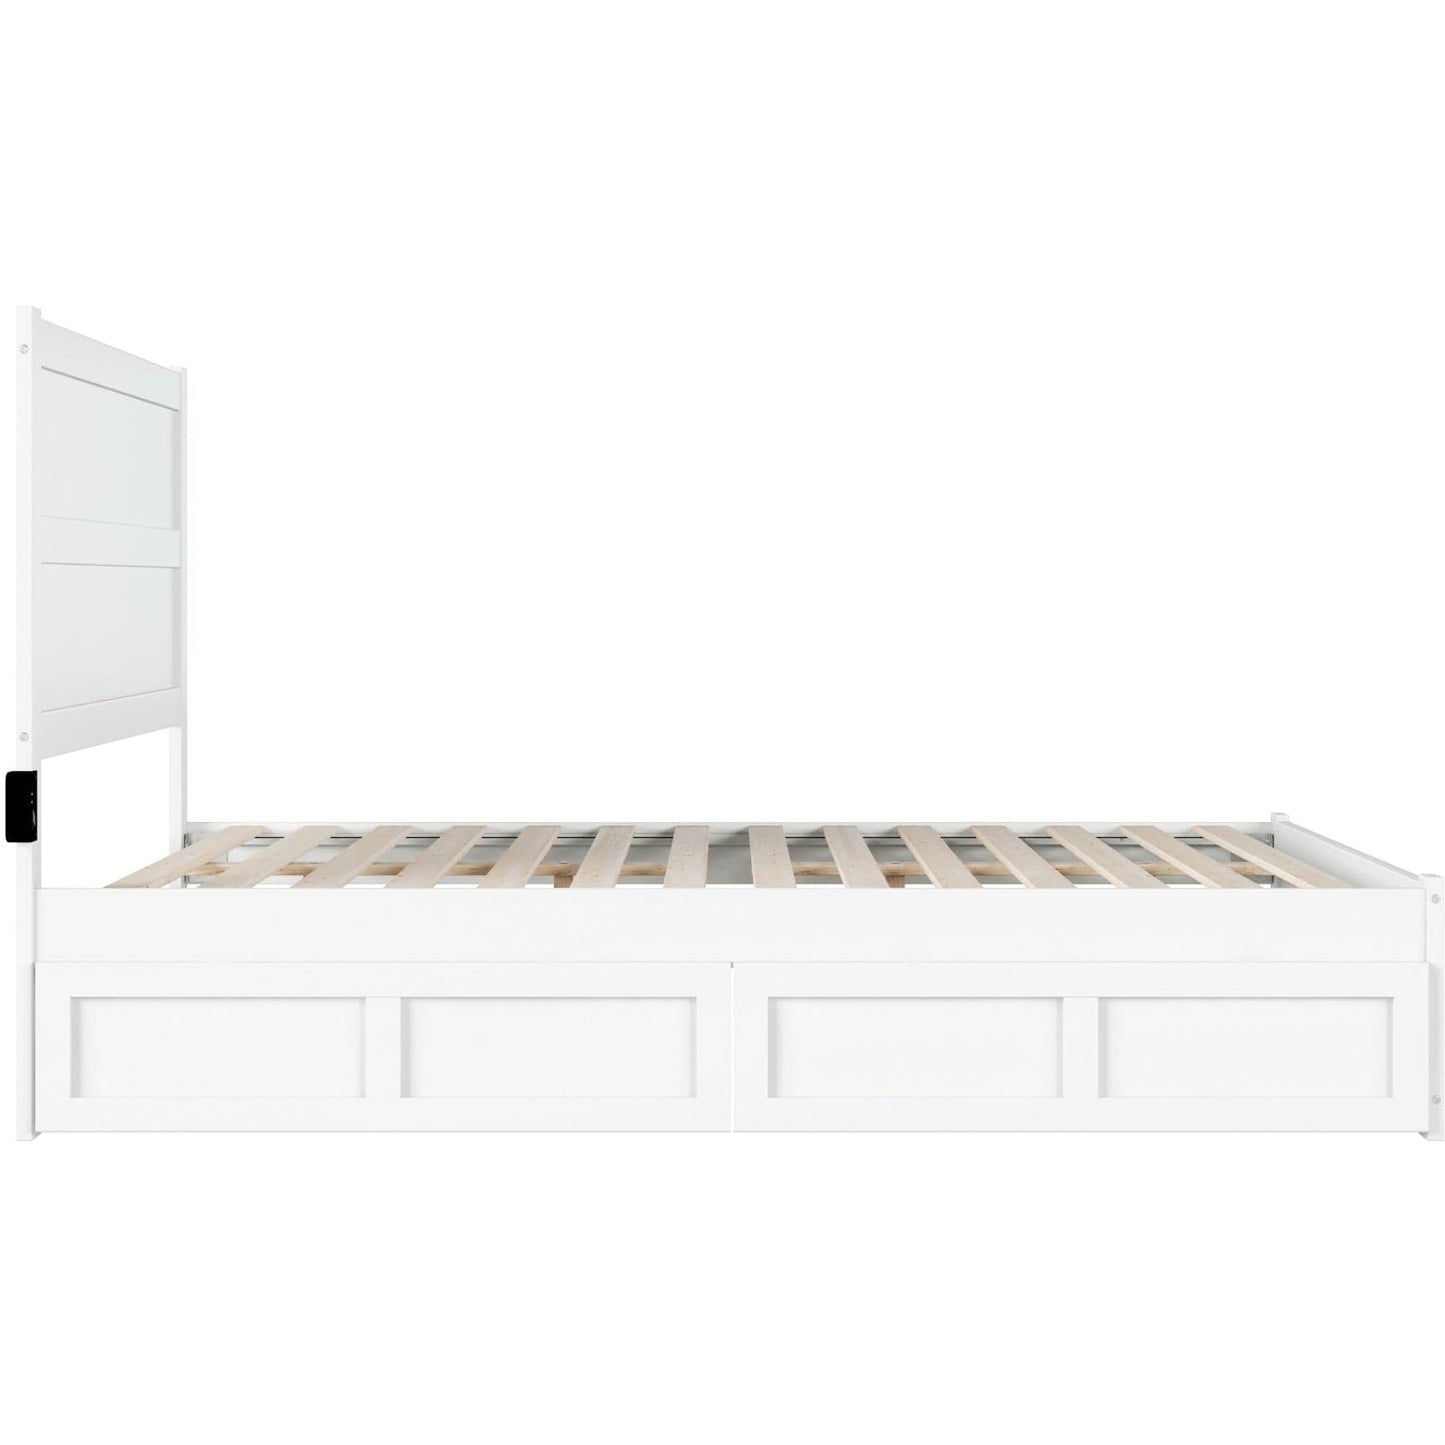 AFI Furnishings NoHo Queen Bed with Footboard and 2 Drawers in White AG9163442